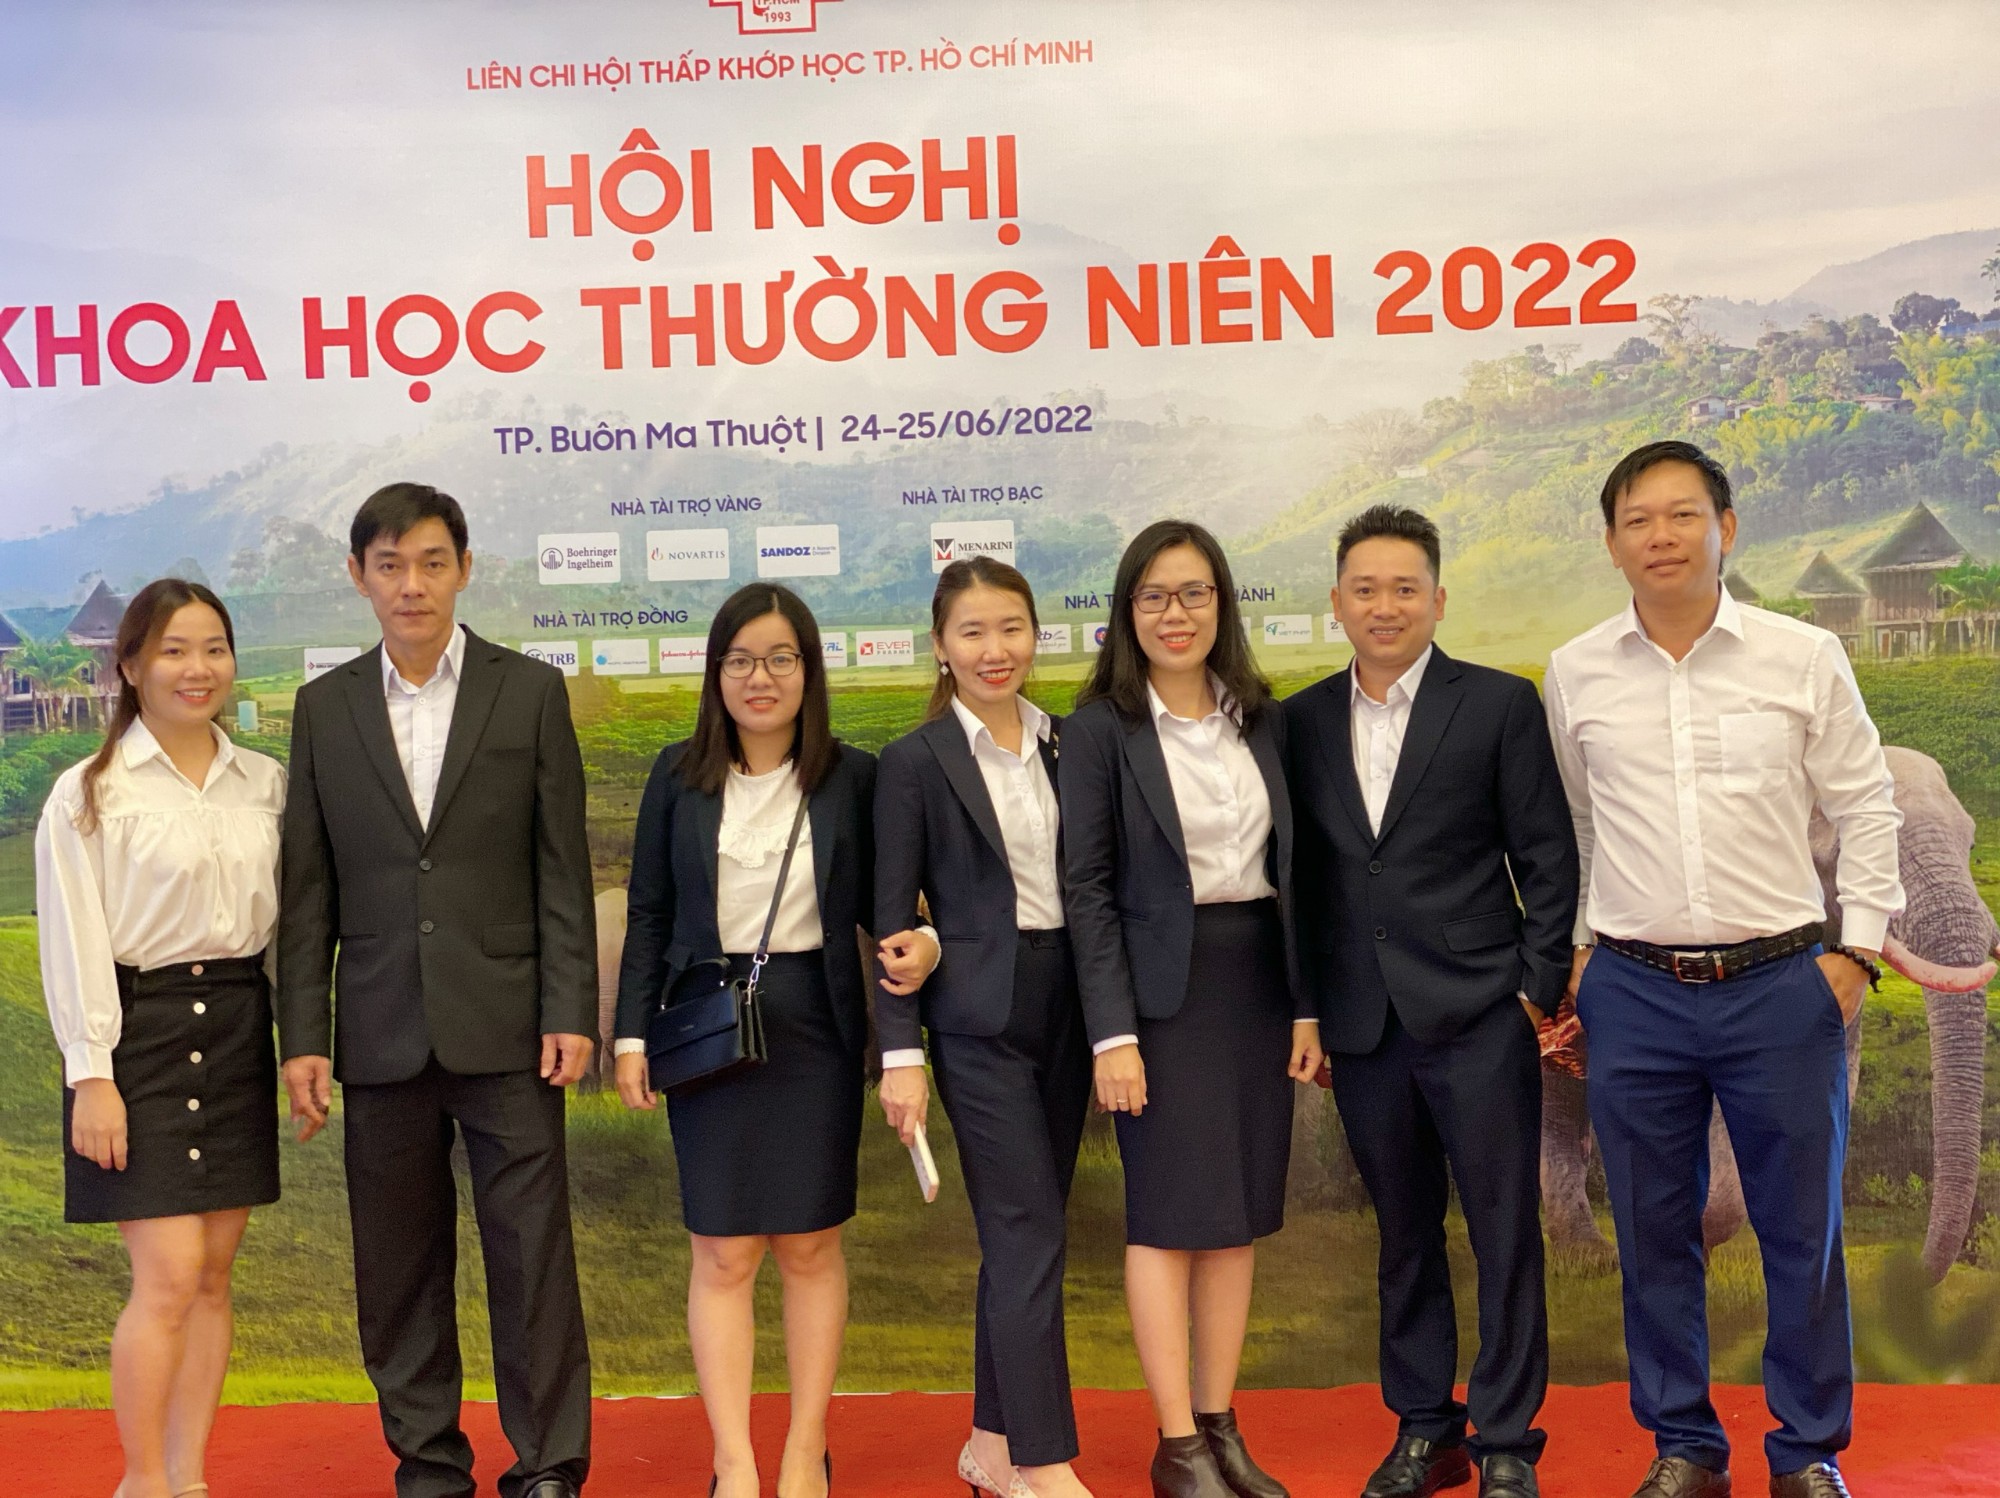 Joint Scientific Conference of the Rheumatology Association 2022 - Buon Ma Thuot